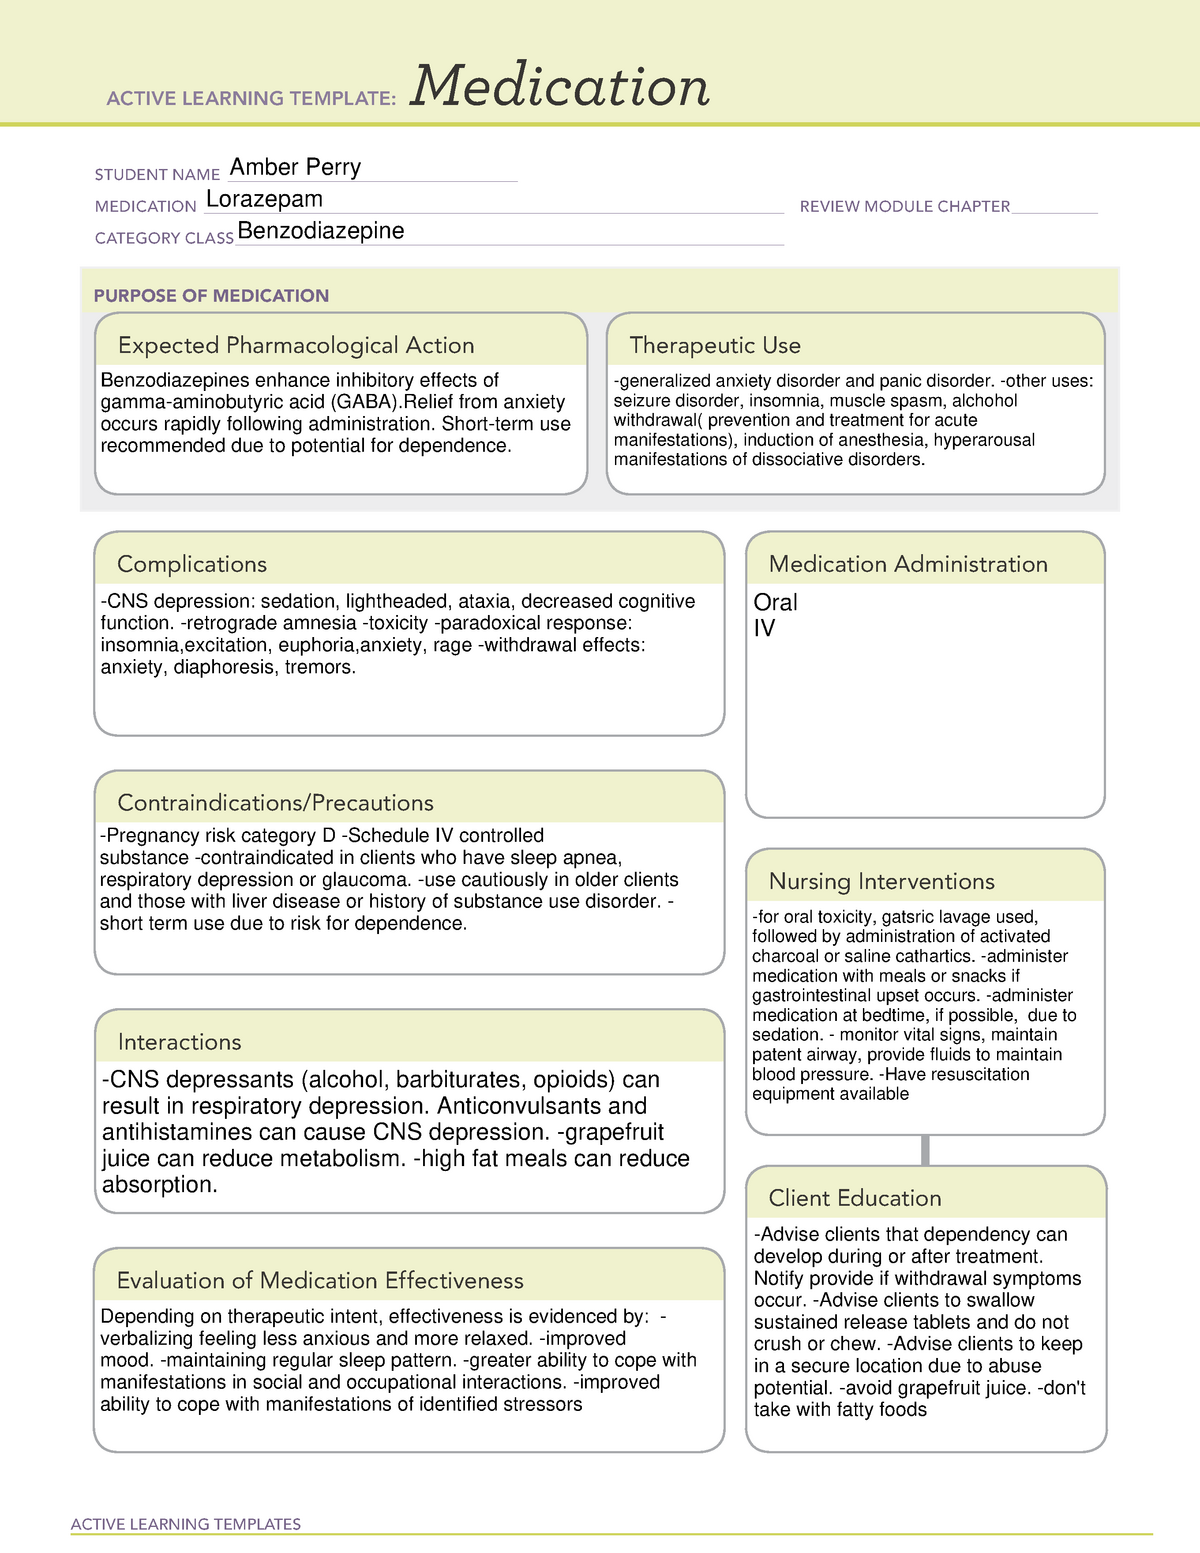 ati-med-lorazepam-template-active-learning-templates-medication-student-name-studocu